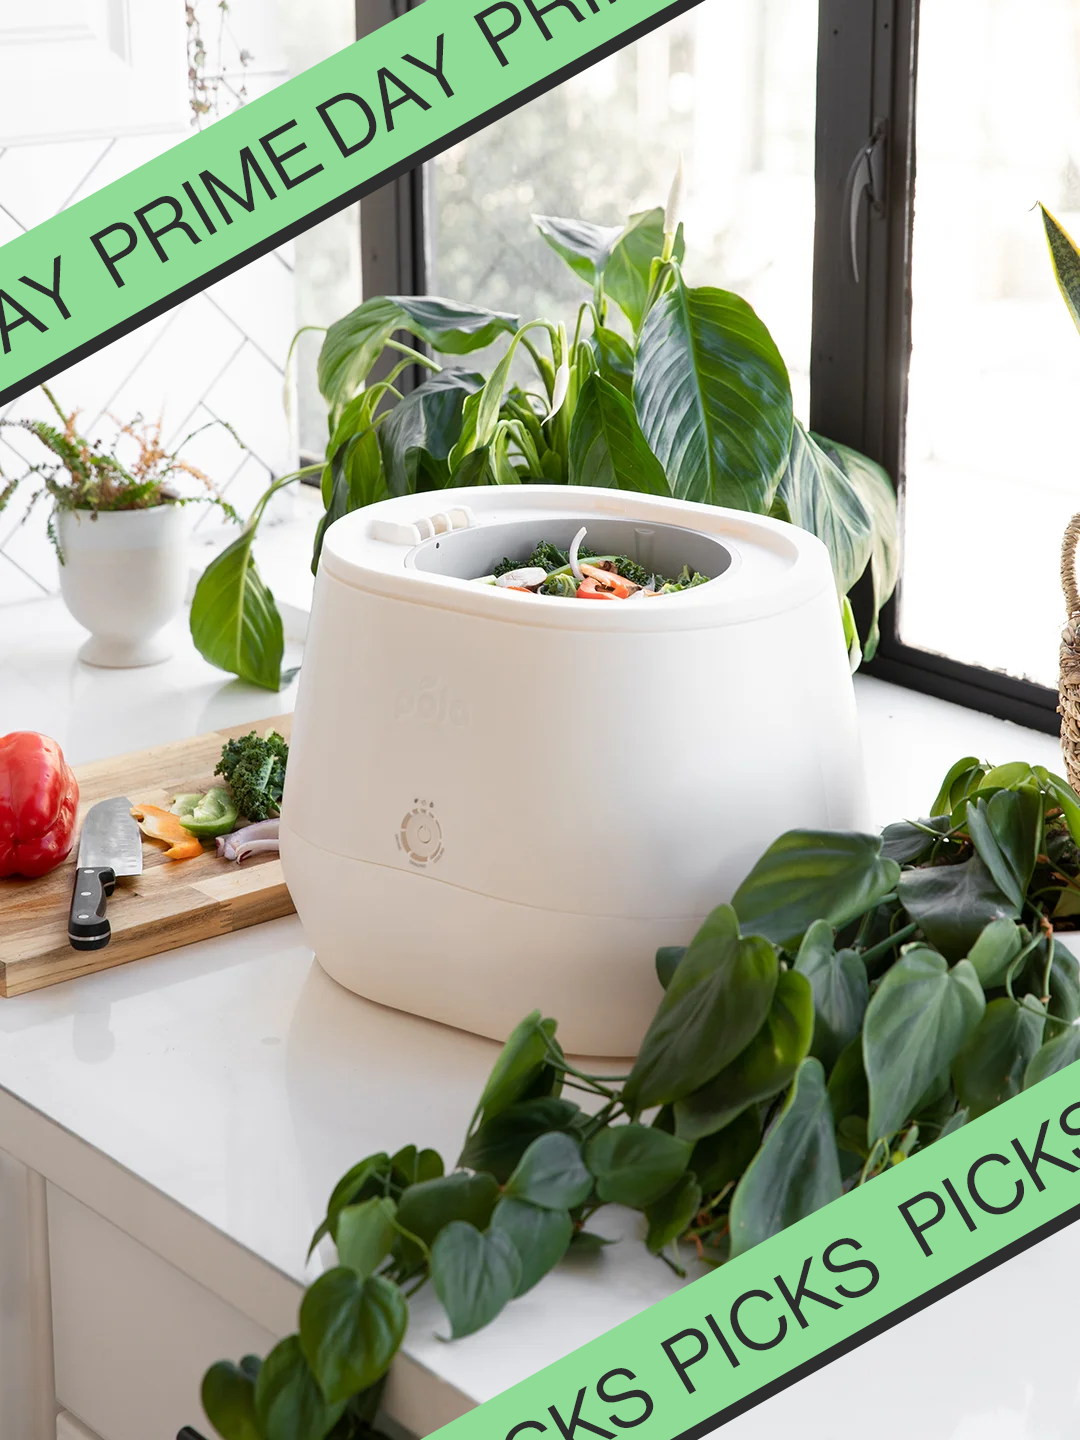 Lomi Home Composter Review- Compost Bioplastics & Food at Home